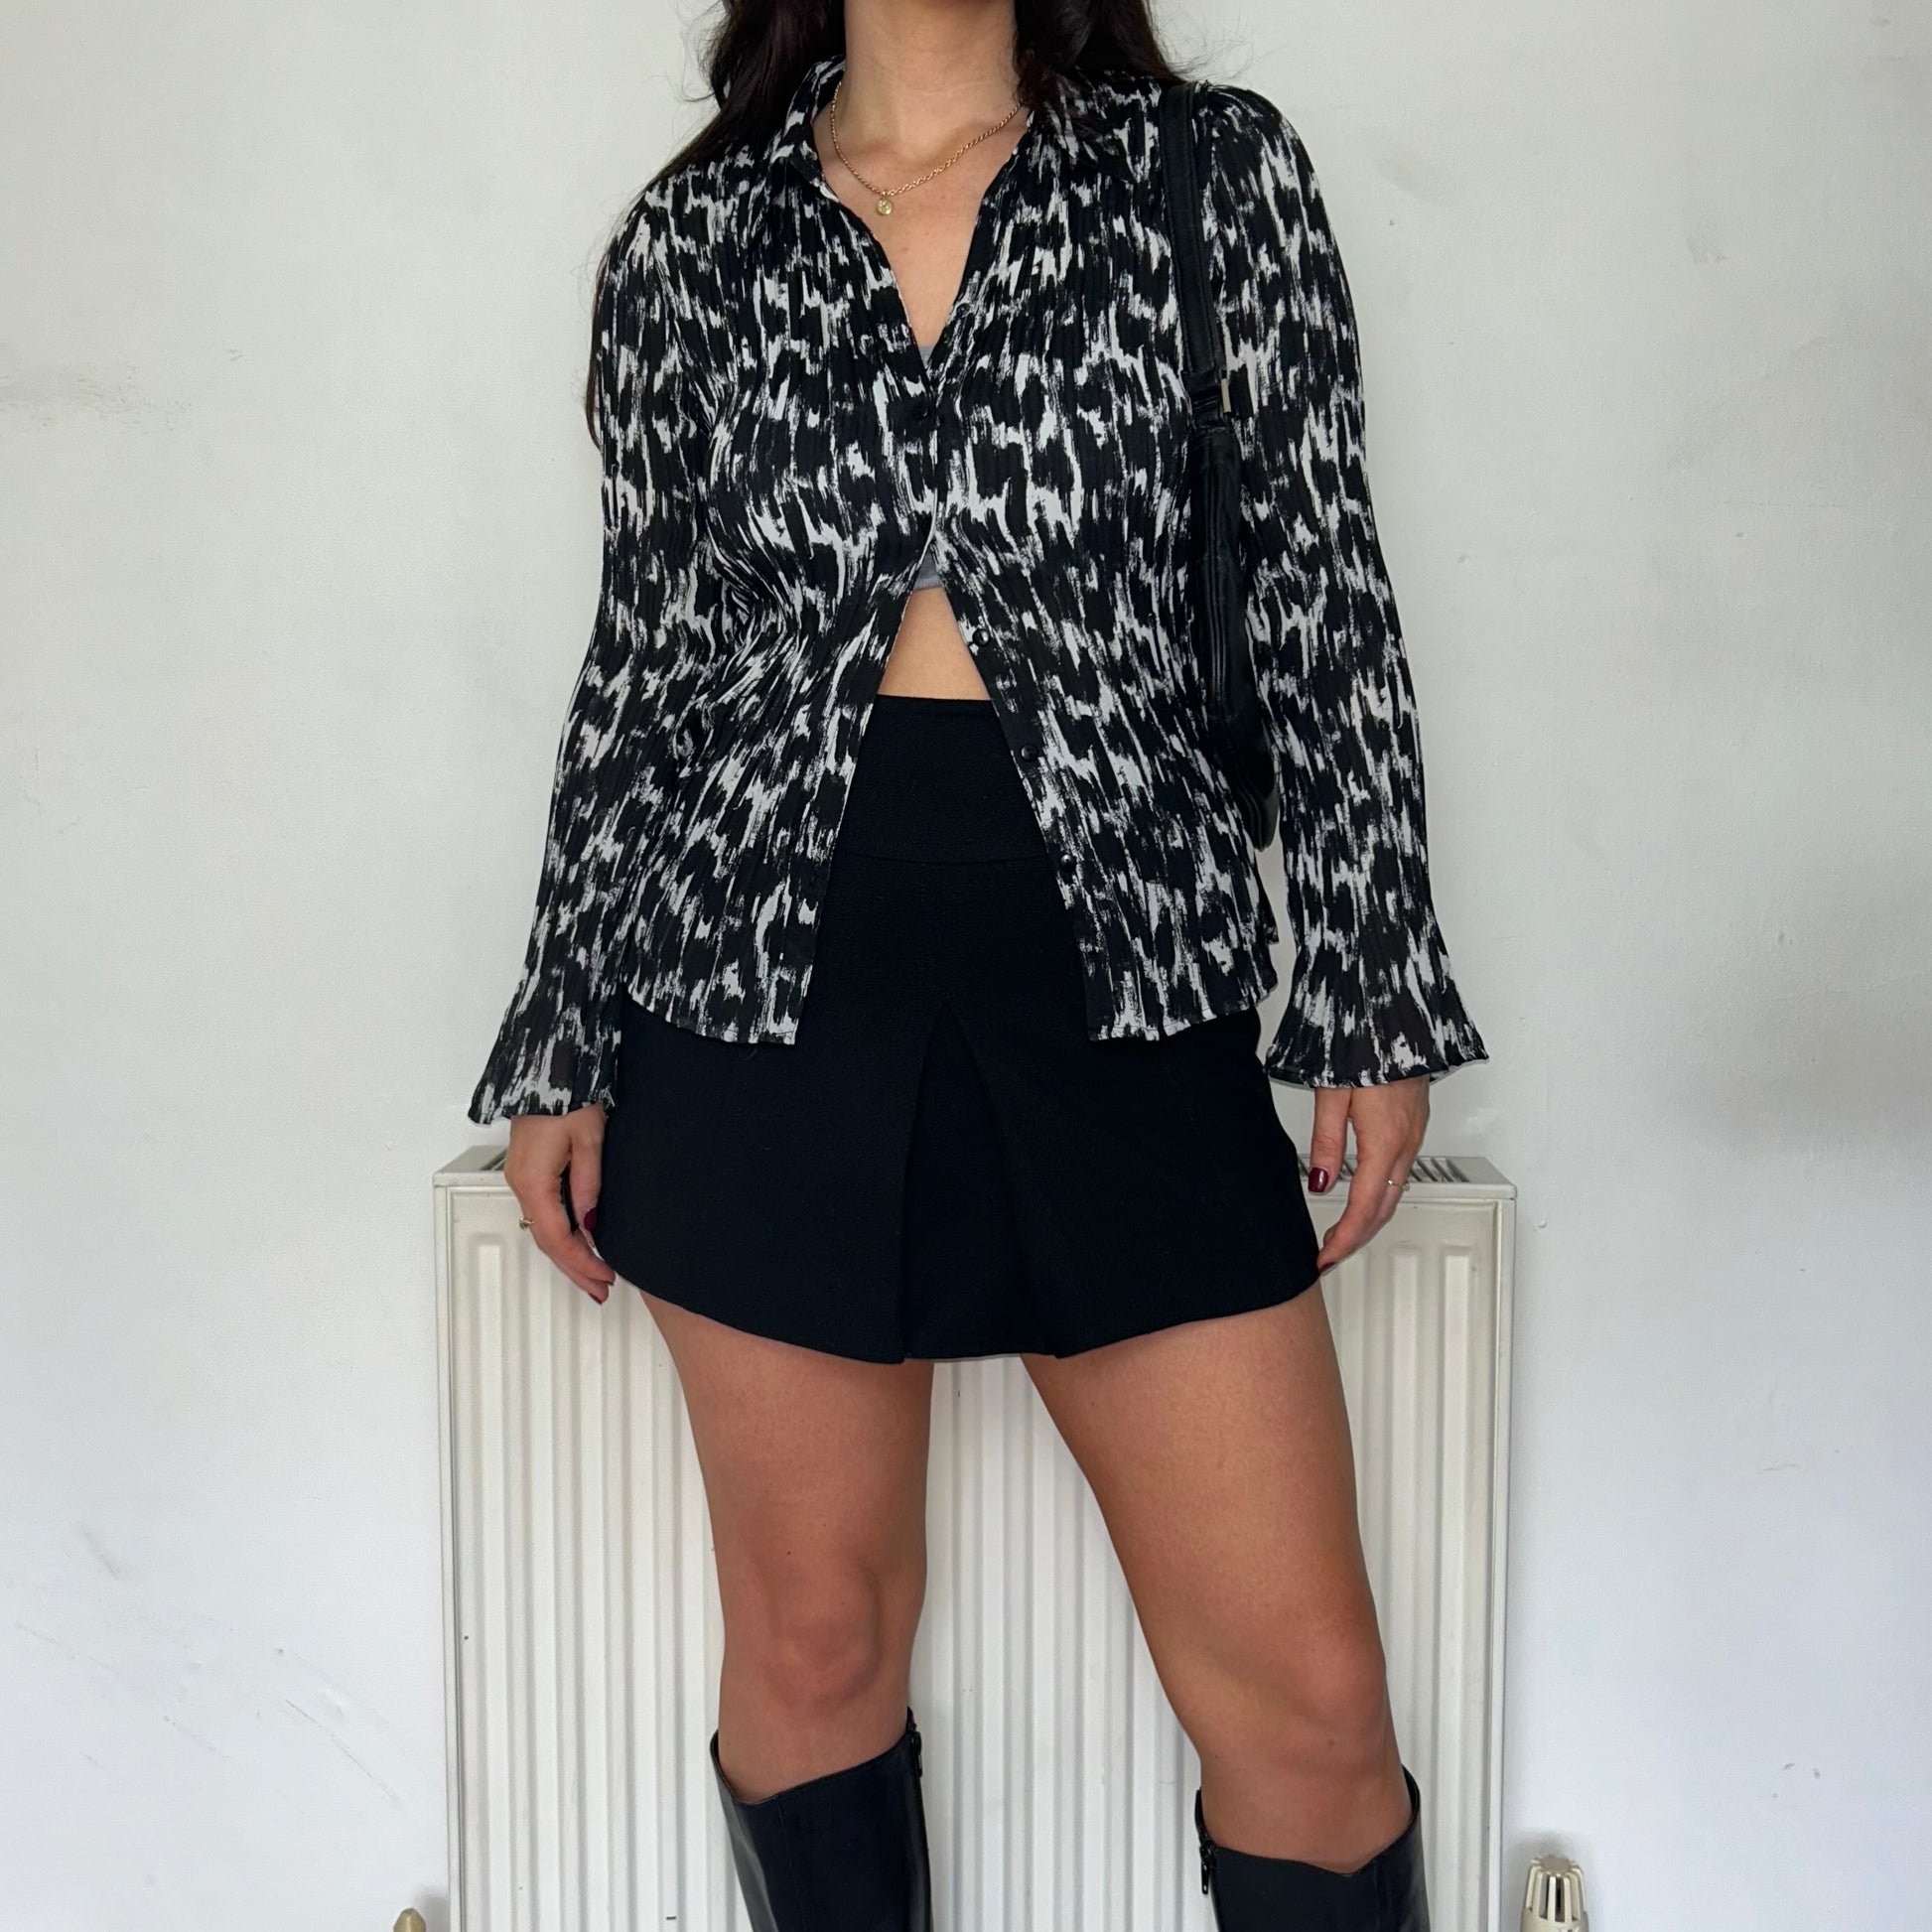 black an white blouse shown on a model wearing a black mini skirt and black boots with a black shoulder bag